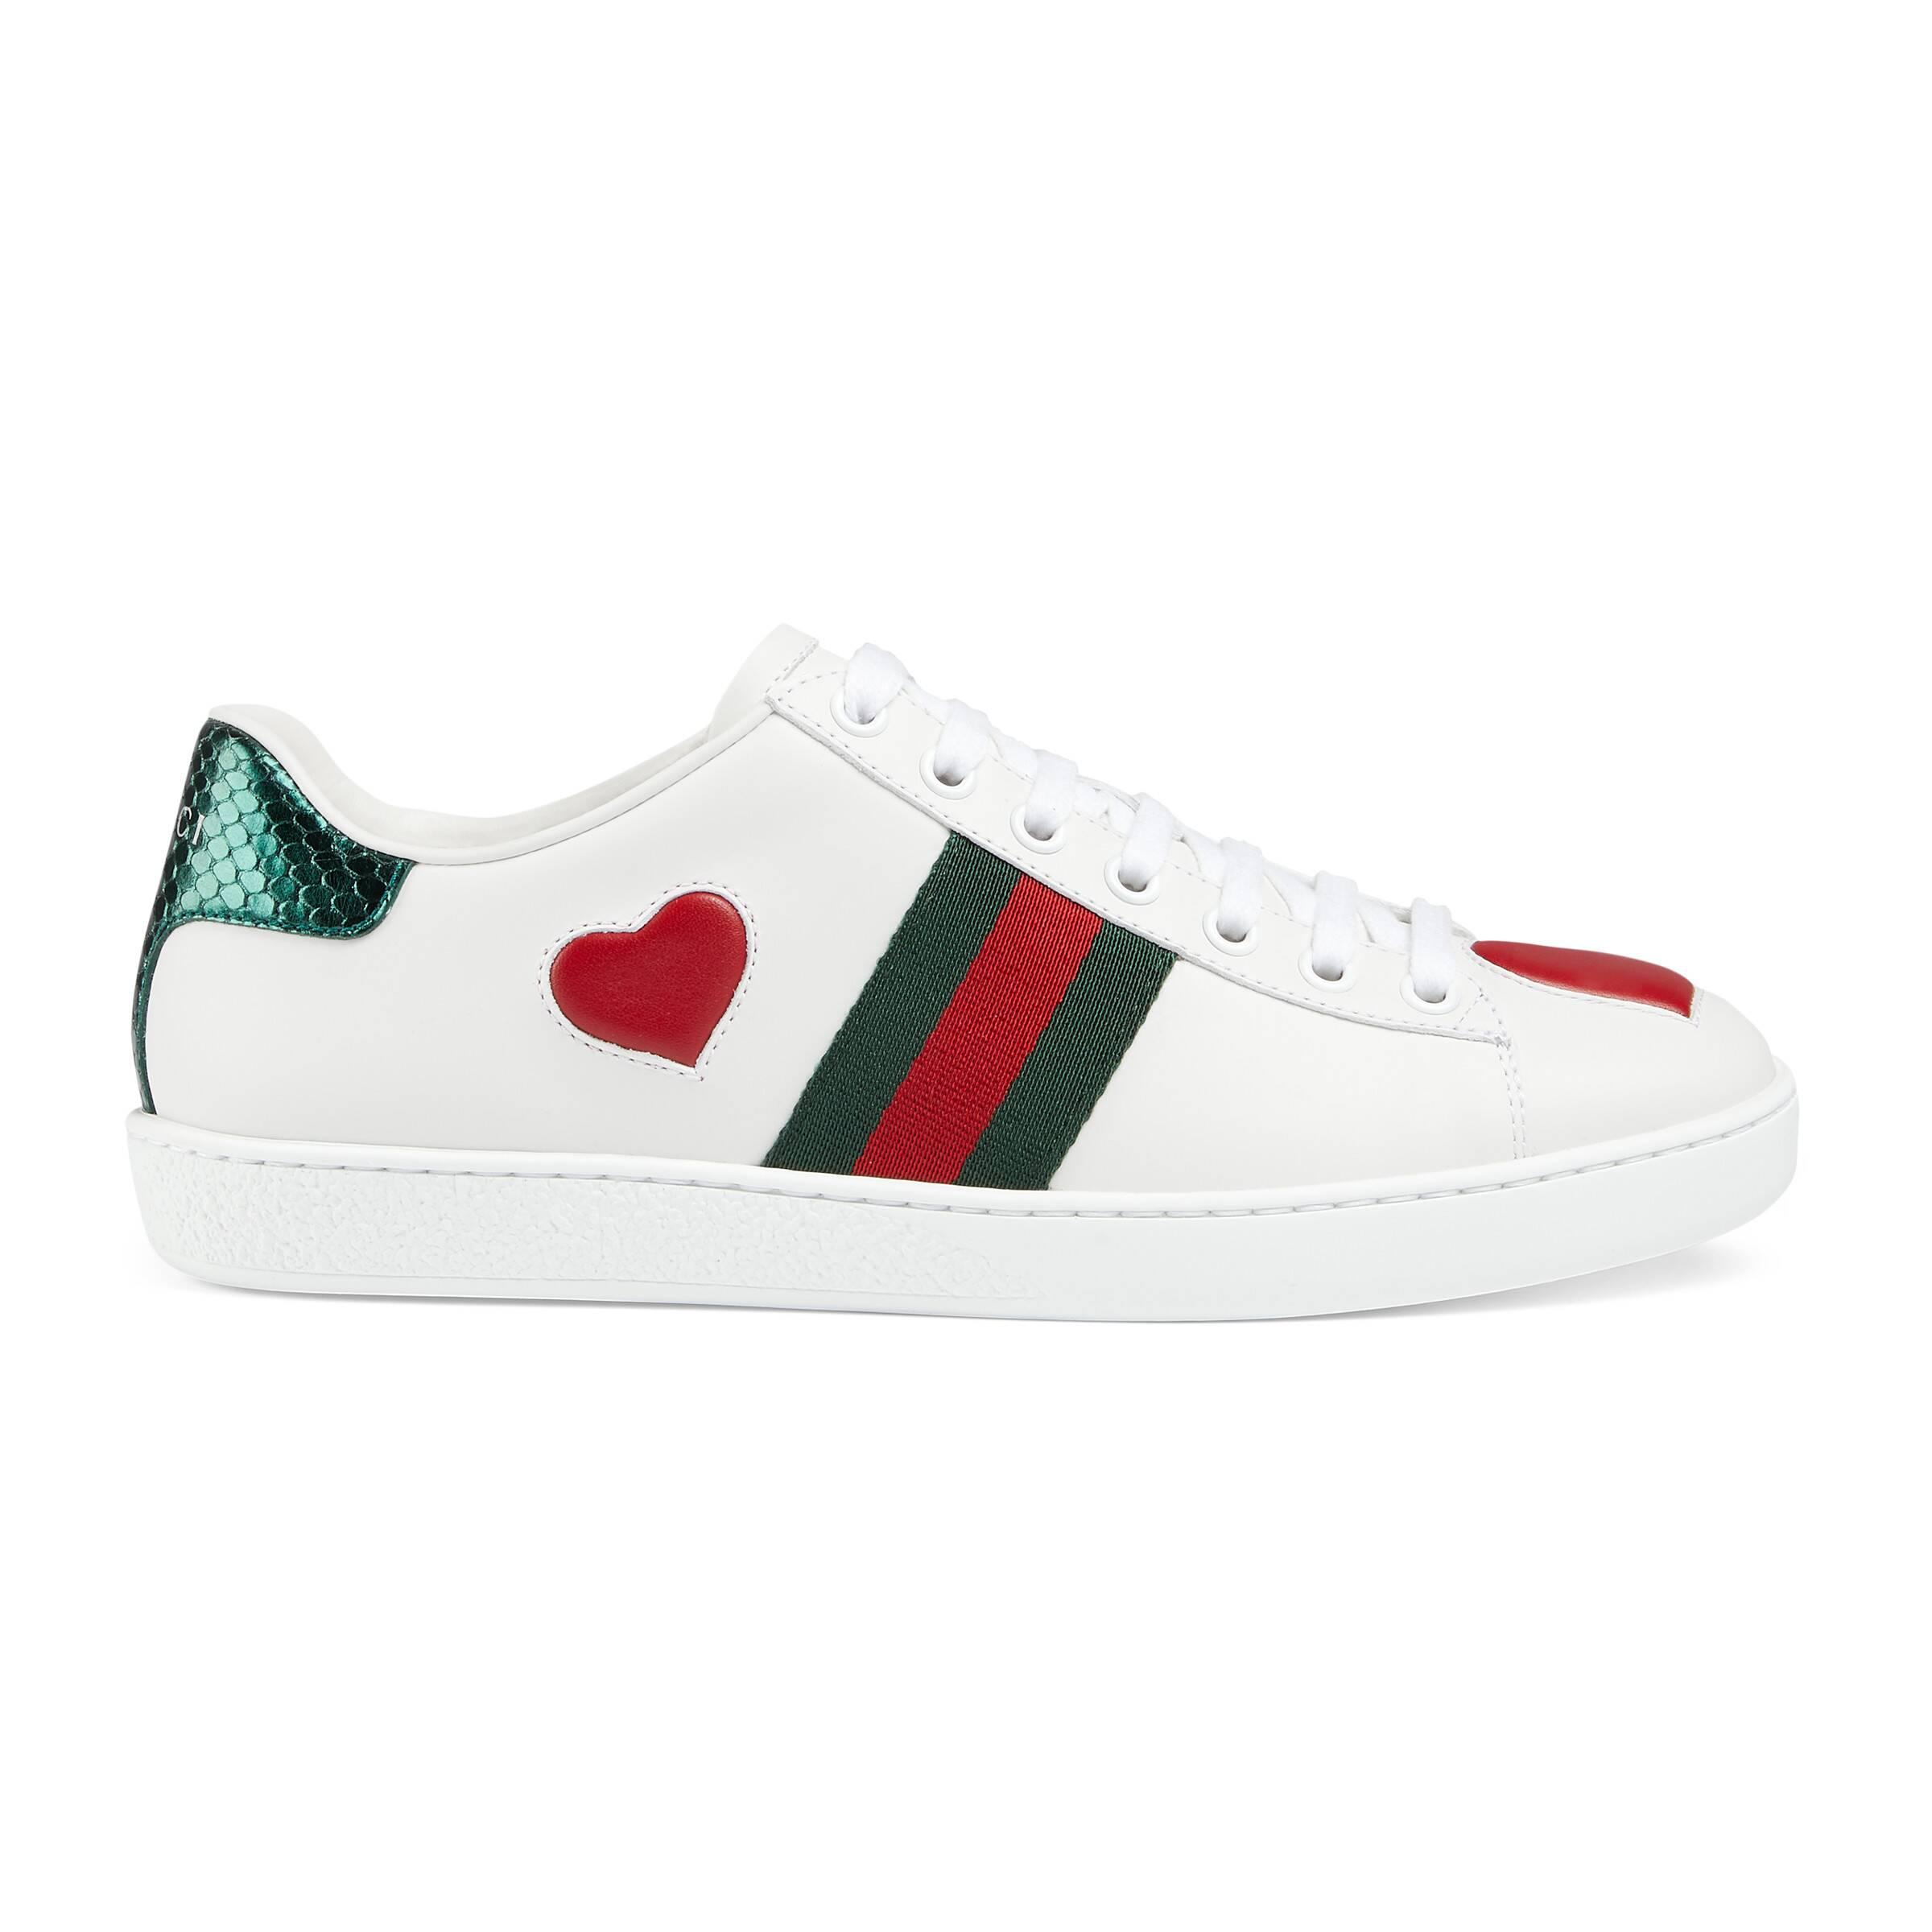 Gucci Leather Ace Embroidered Sneaker in White - Lyst